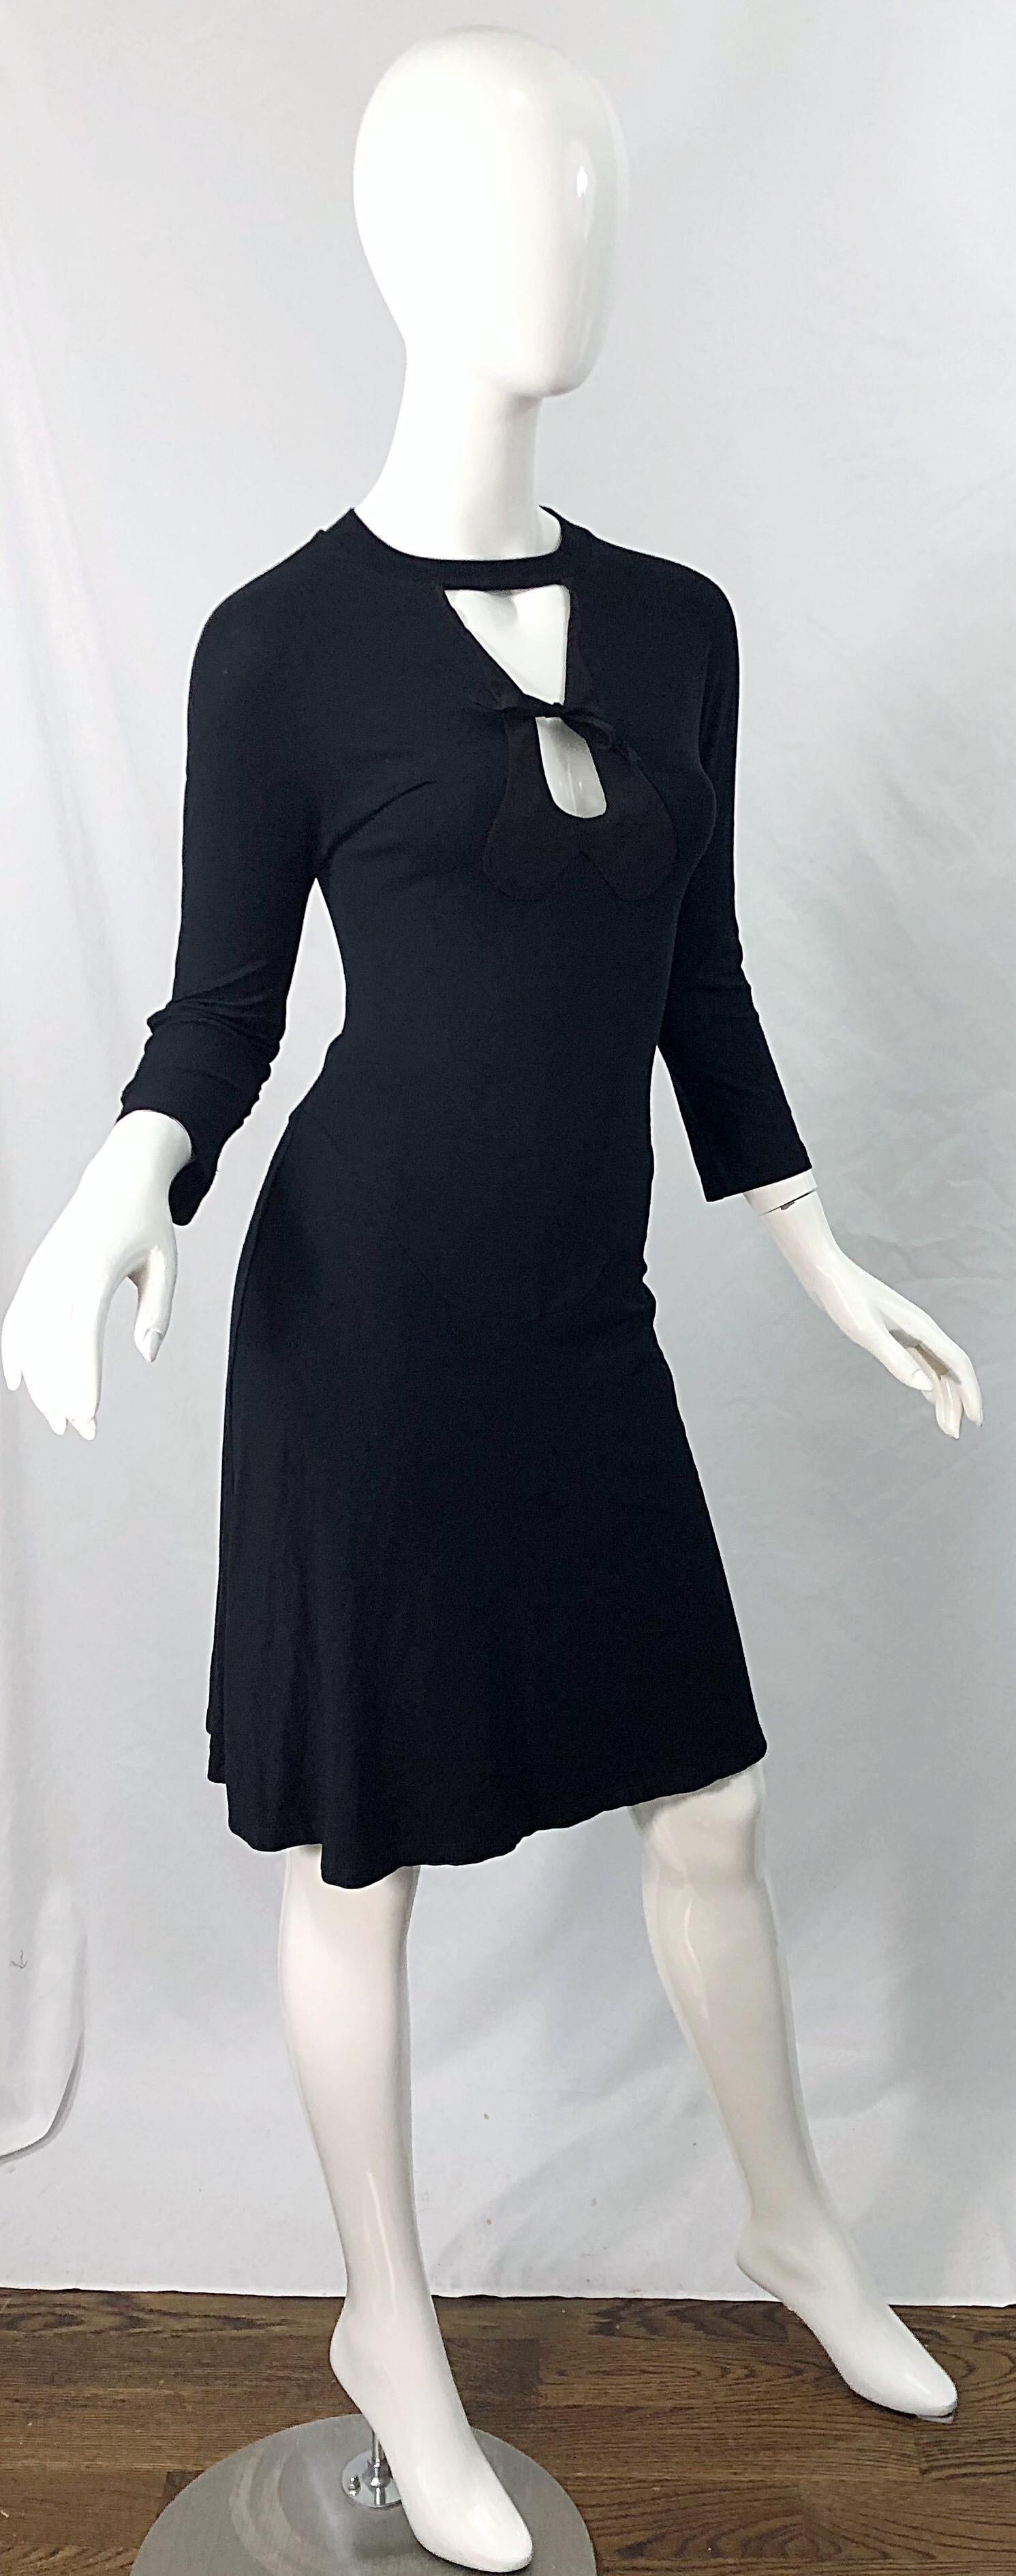 Gibo Early 2000s Italian Made Size 40 Black Cut - Out 3/4 Sleeves Dress  For Sale 4